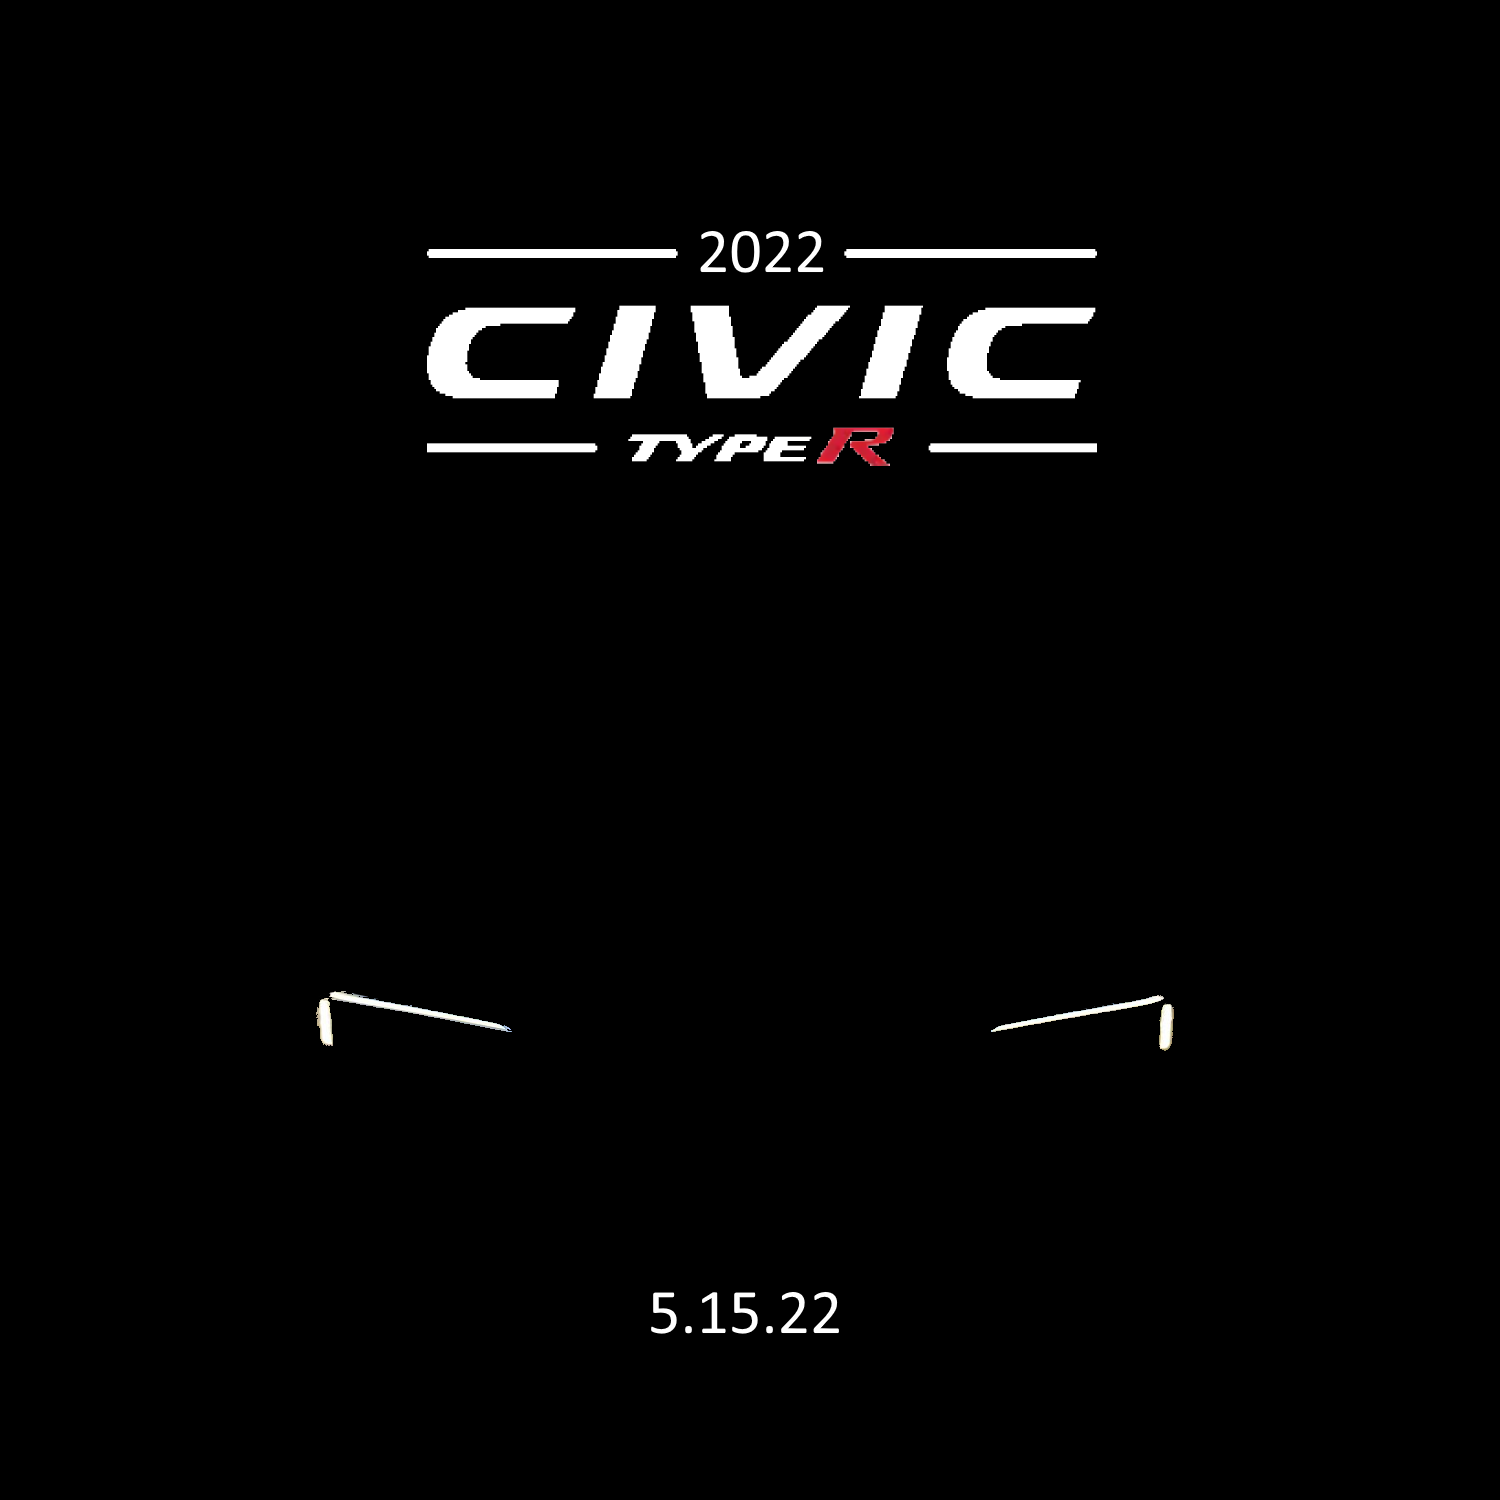 11th Gen Honda Civic 2022 Honda Civic Hatchback Begins Production At Indiana Auto Plant!! Type R reveal